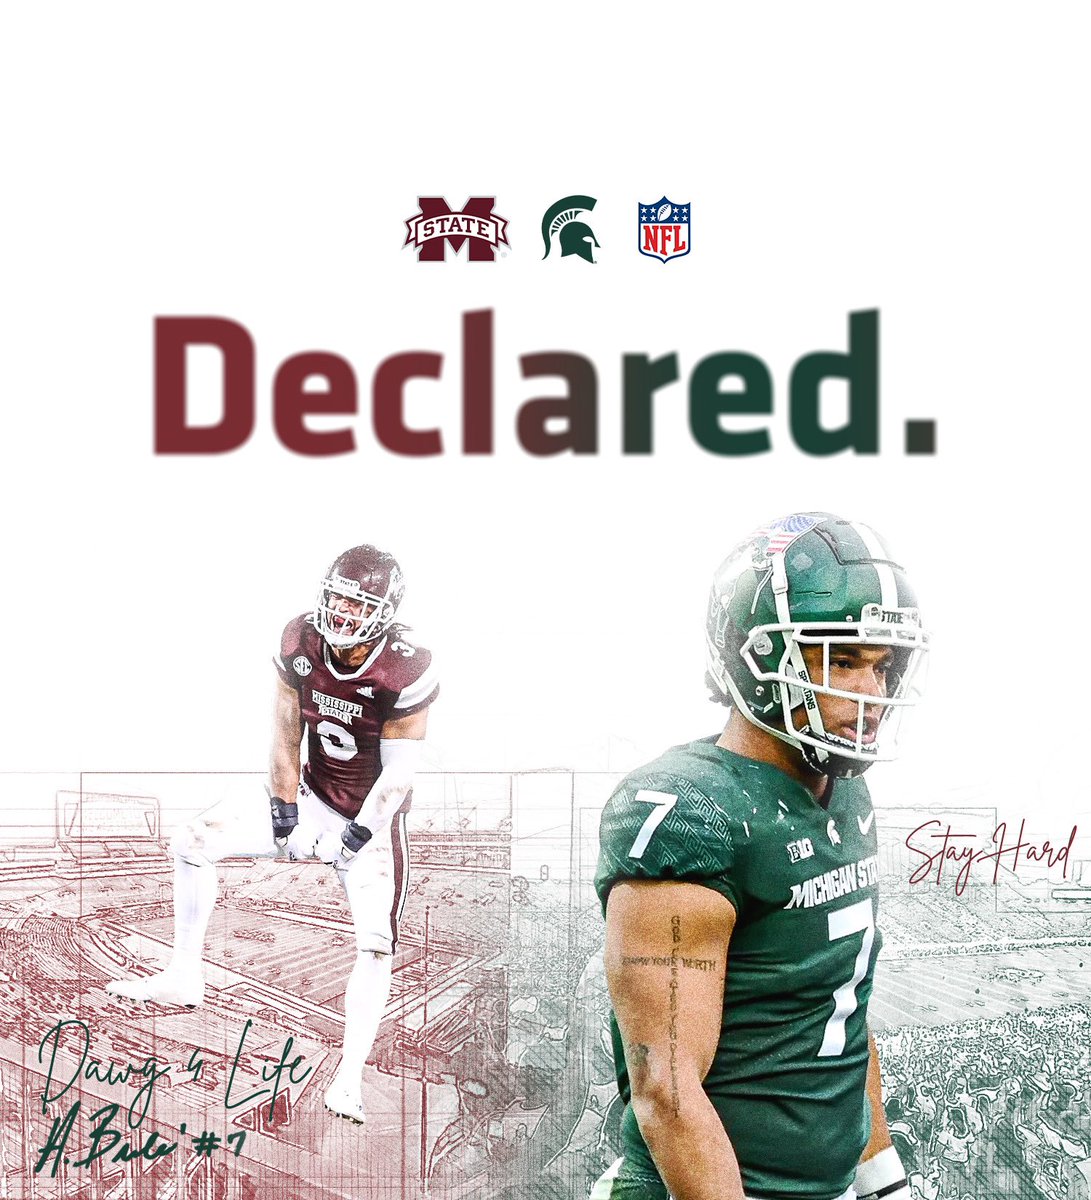 (N)ever (F)ear (L)ife My family is my priority, I’m thankful for every coach I’ve had, people I’ve encountered, and all the life long friends I’ve made. I’m laying it all on the line throughout this process. Last laugh. God willing. #Hailstate #GoGreen